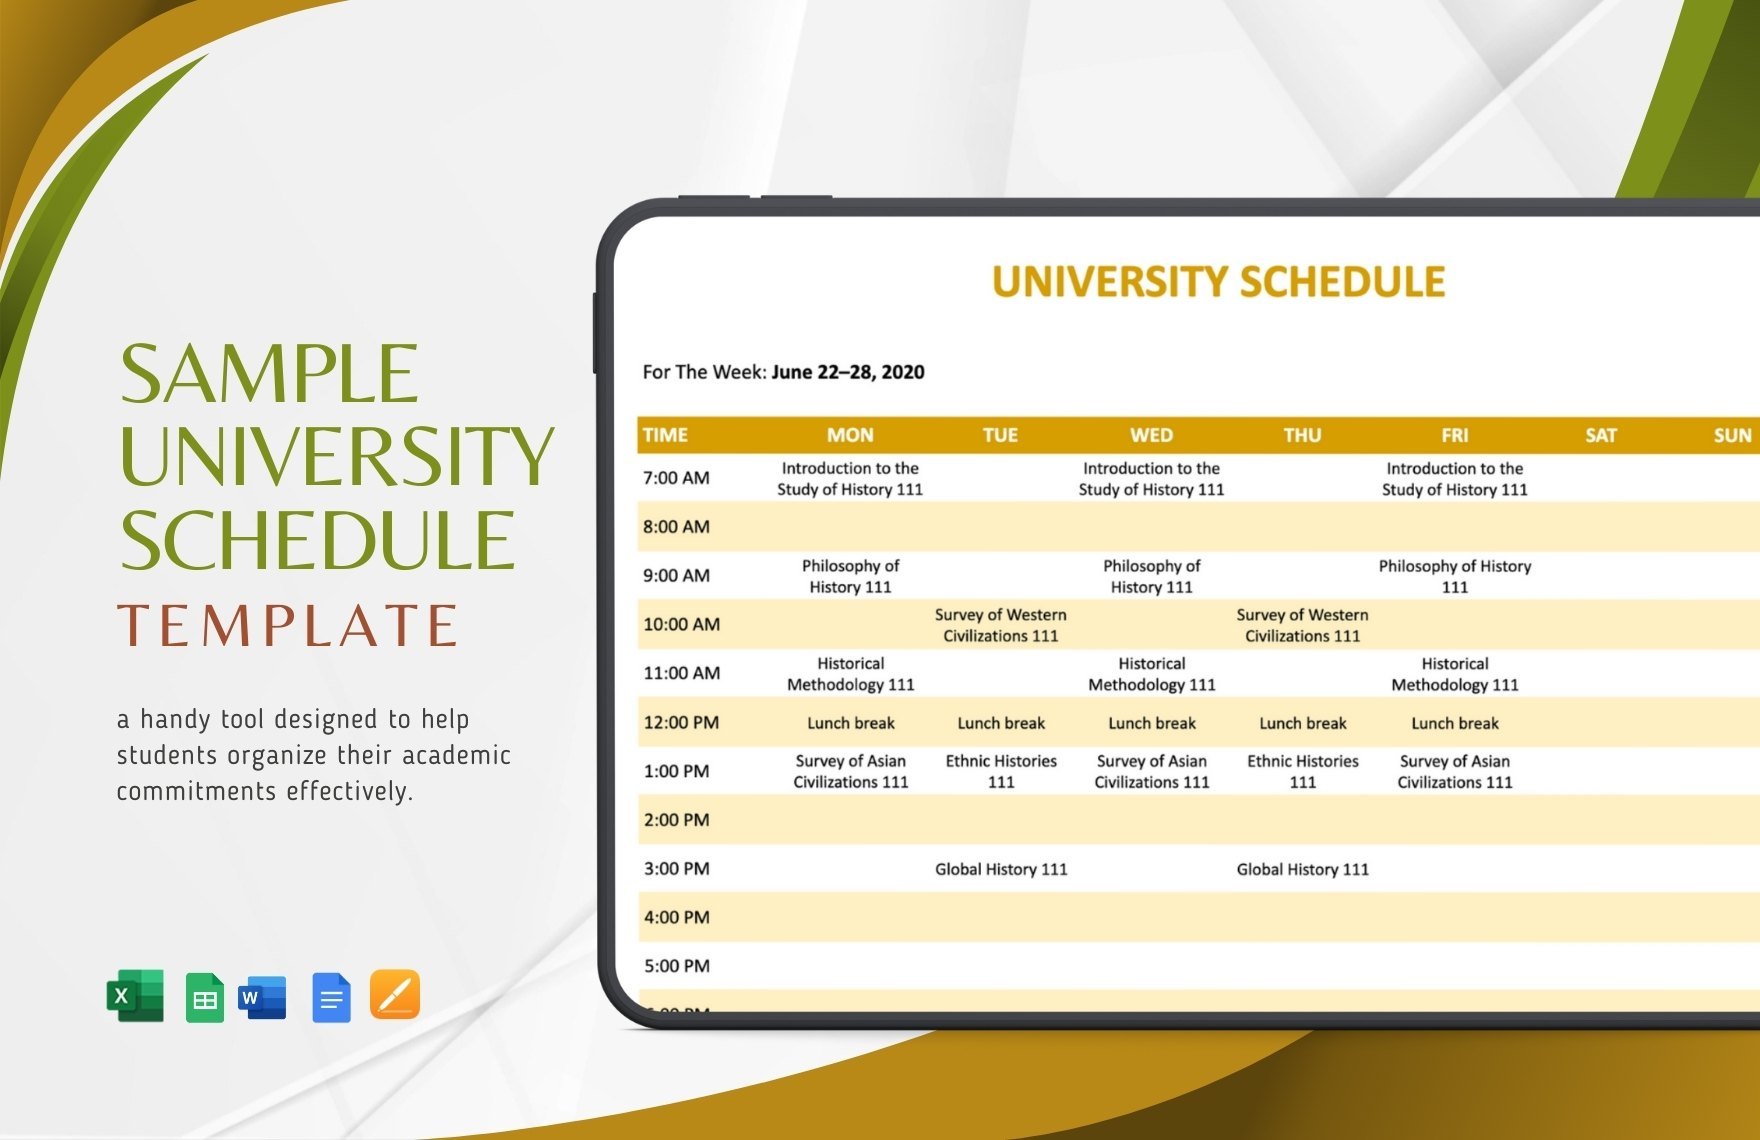 Sample University Schedule Template in Word, Google Docs, Excel, Google Sheets, Apple Pages